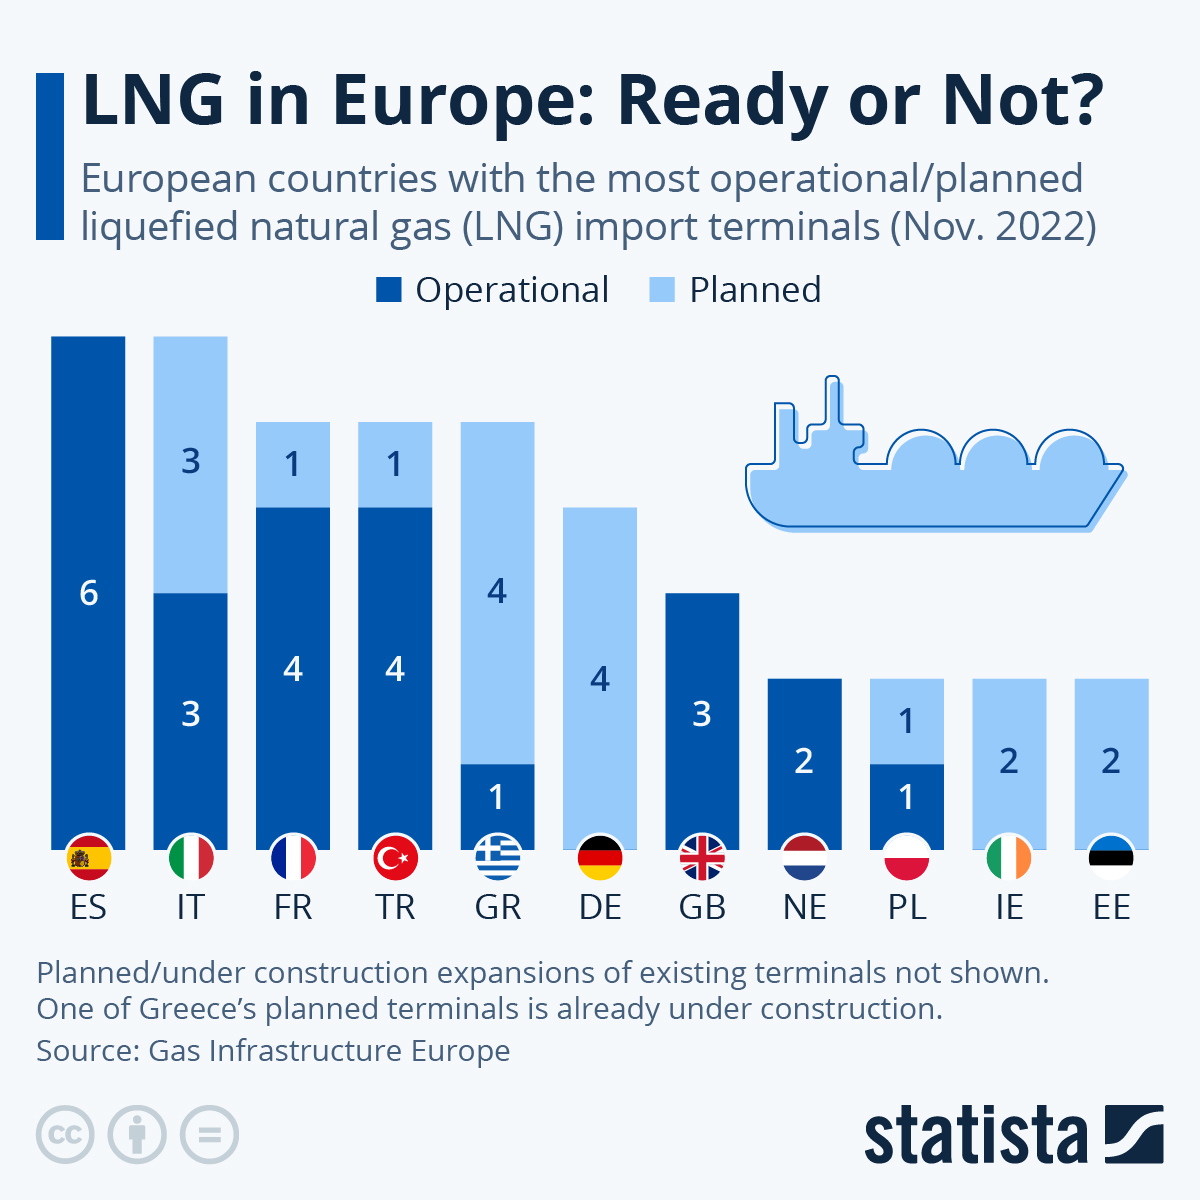 LNG in Europe: Ready or Not?